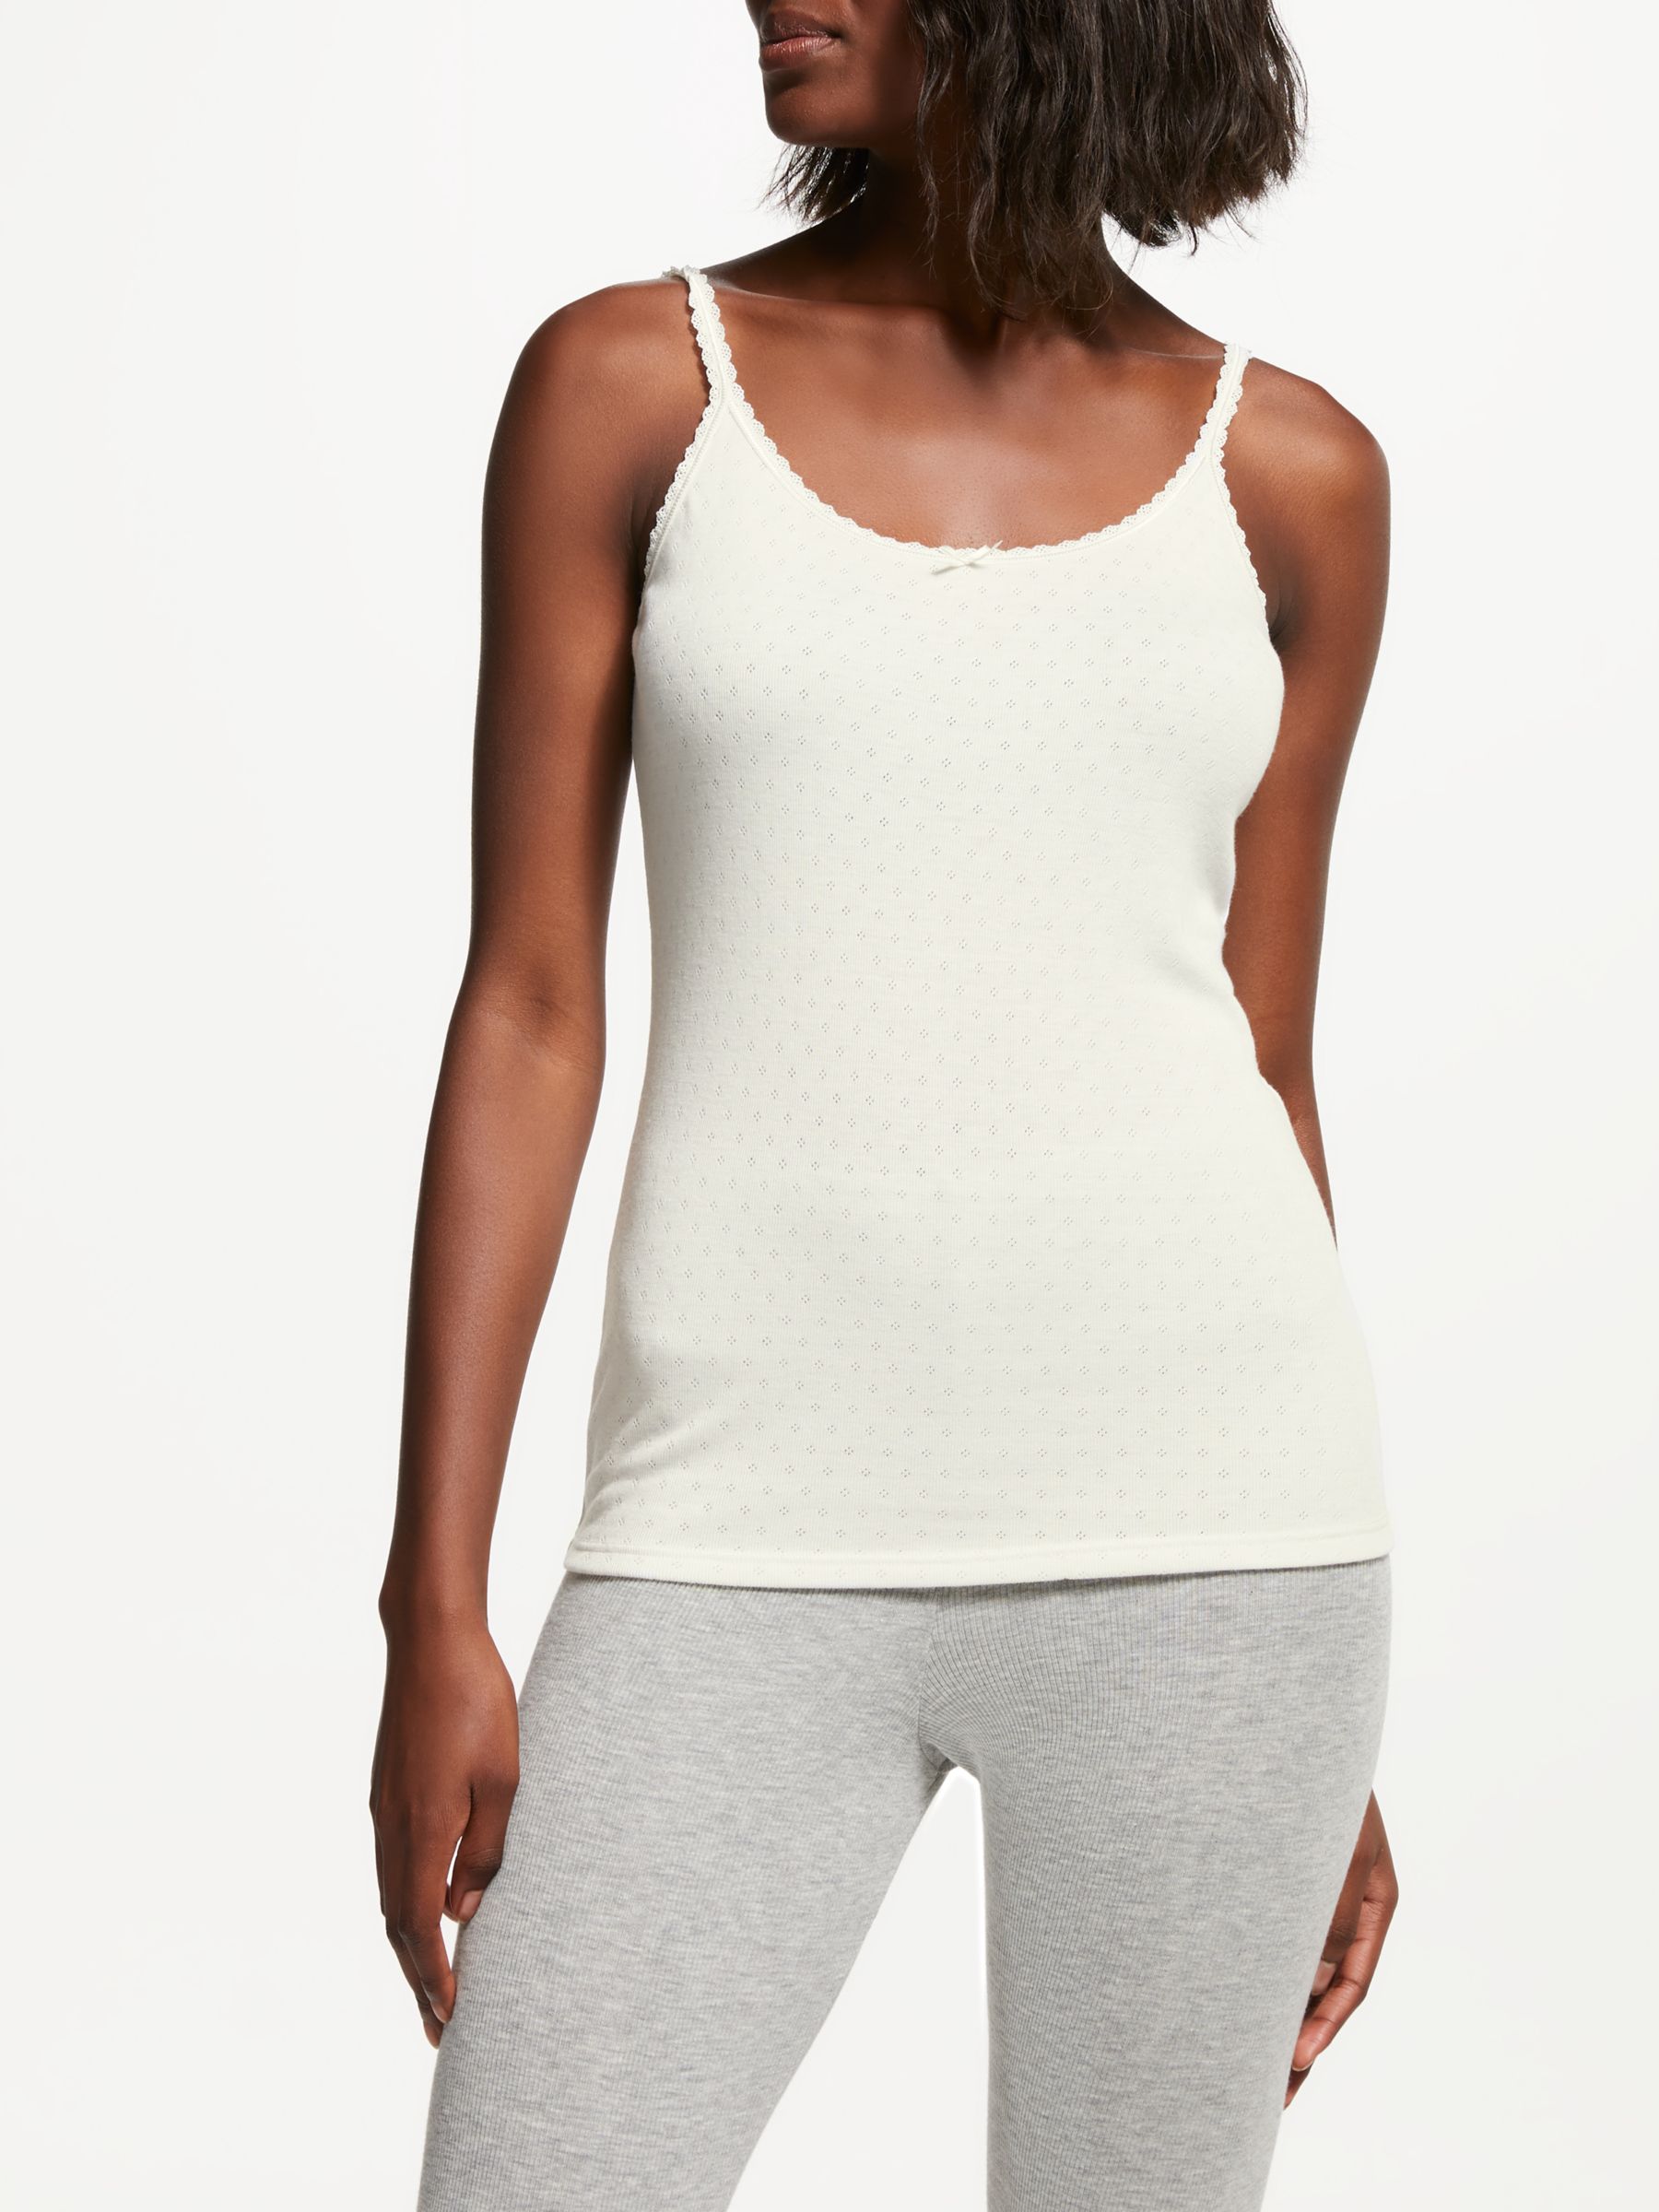 John Lewis Thermal Pointelle Camisole, Ivory at John Lewis & Partners